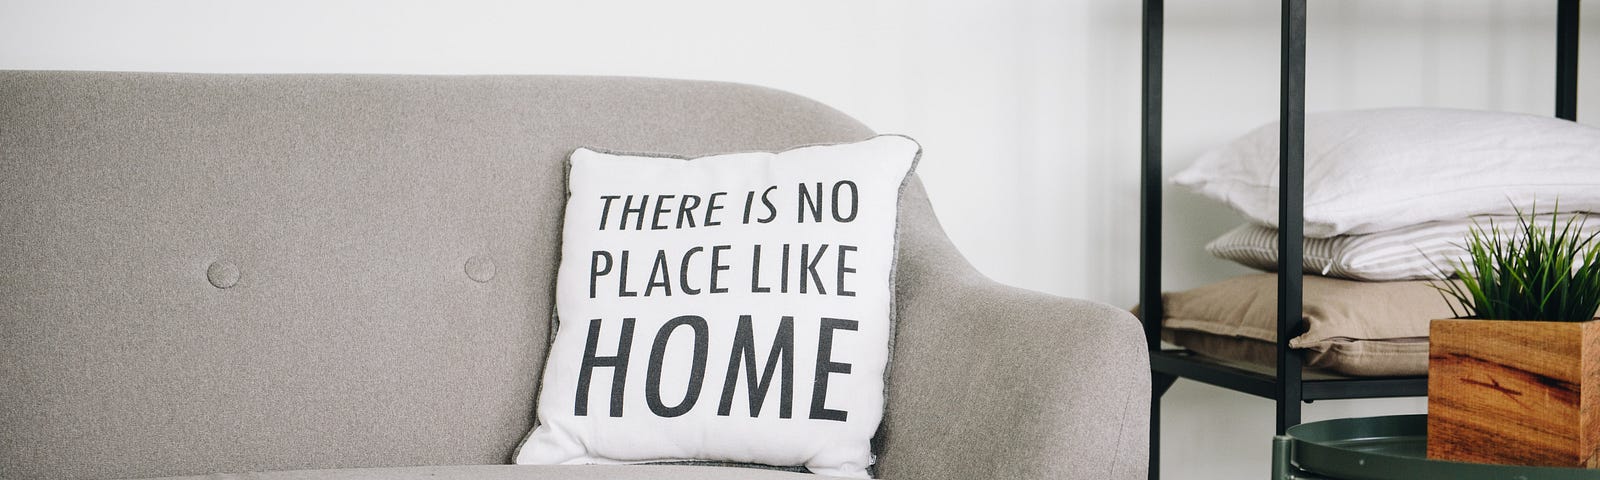 A sofa at home with a cushion that says “There is no place like home.”